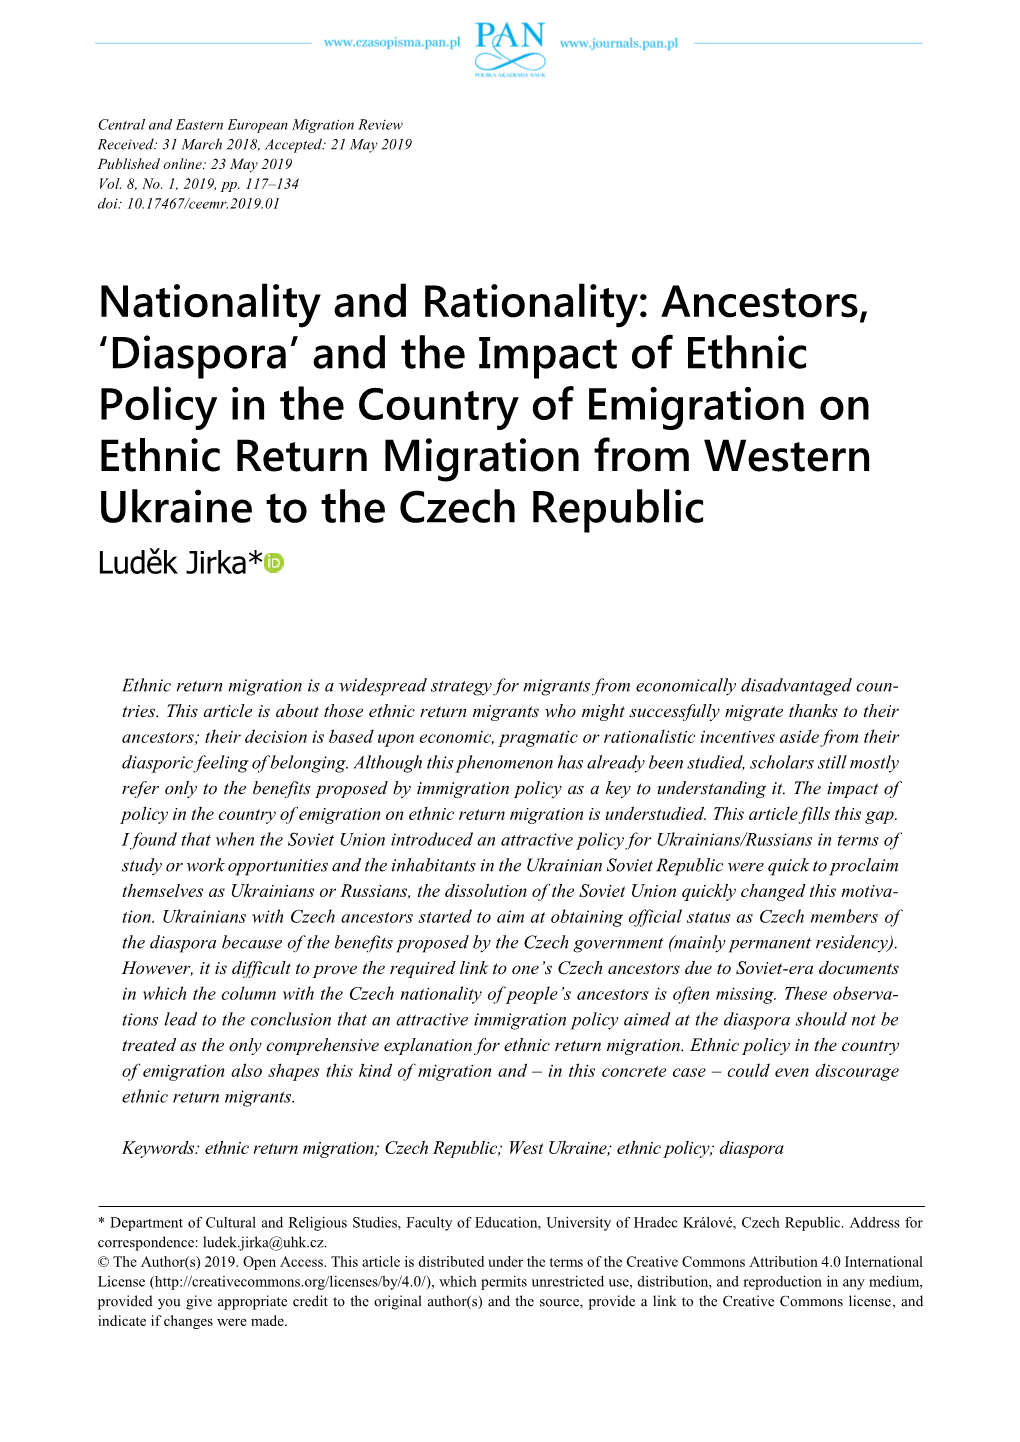 Nationality and Rationality: Ancestors, 'Diaspora' and the Impact of Ethnic Policy in the Country of Emigration on Ethnic Re